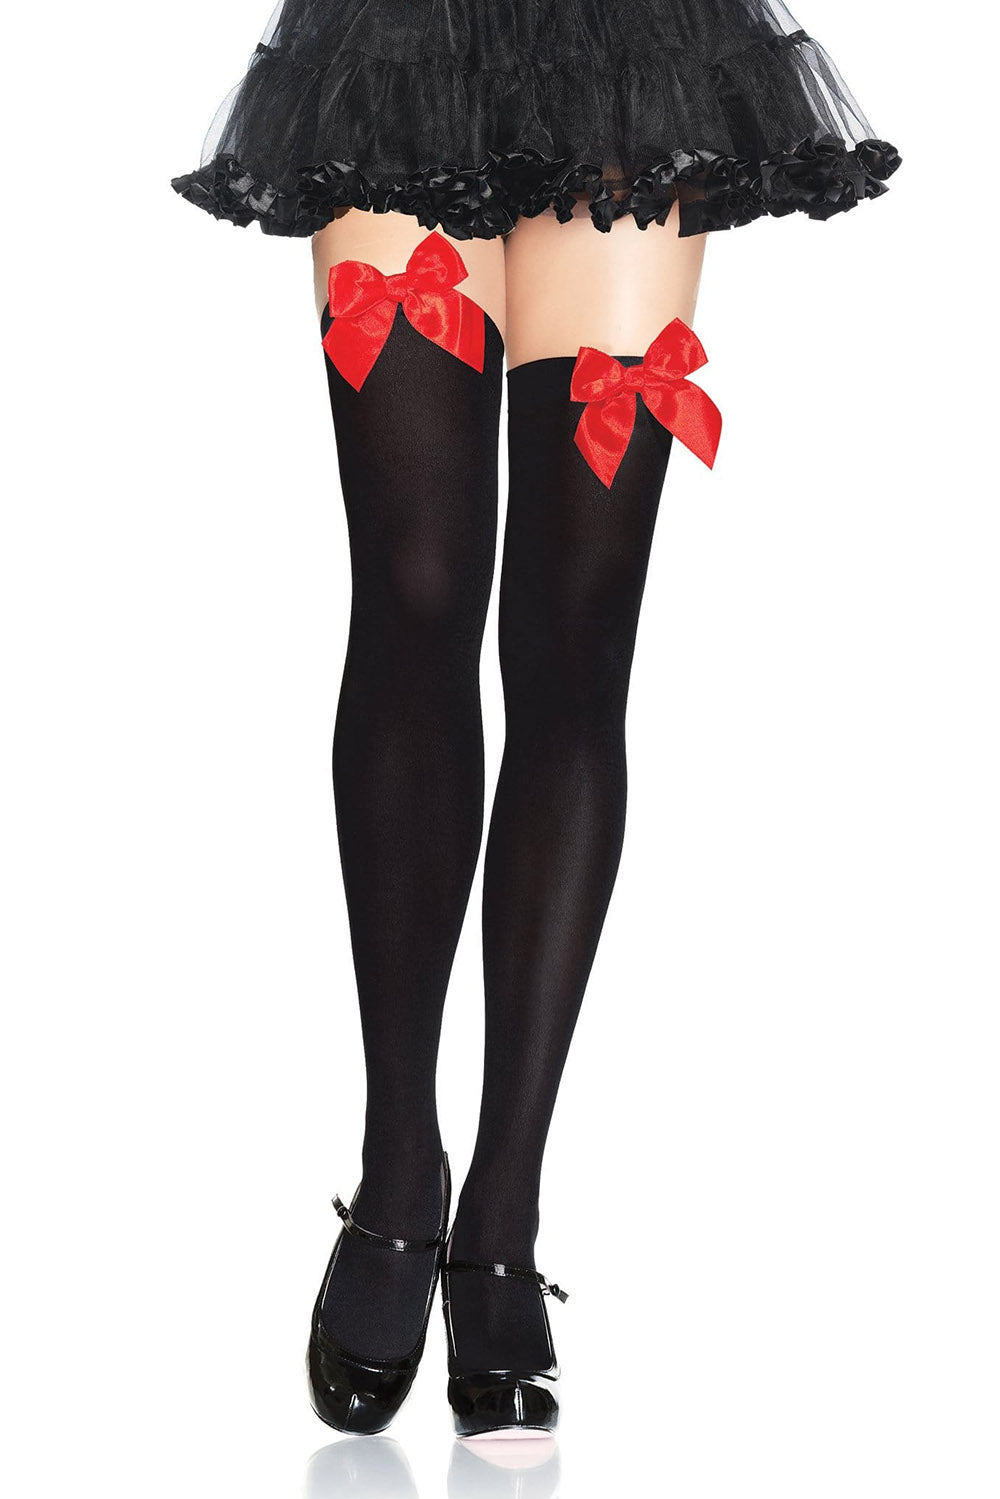 thigh highs with ribbon bows